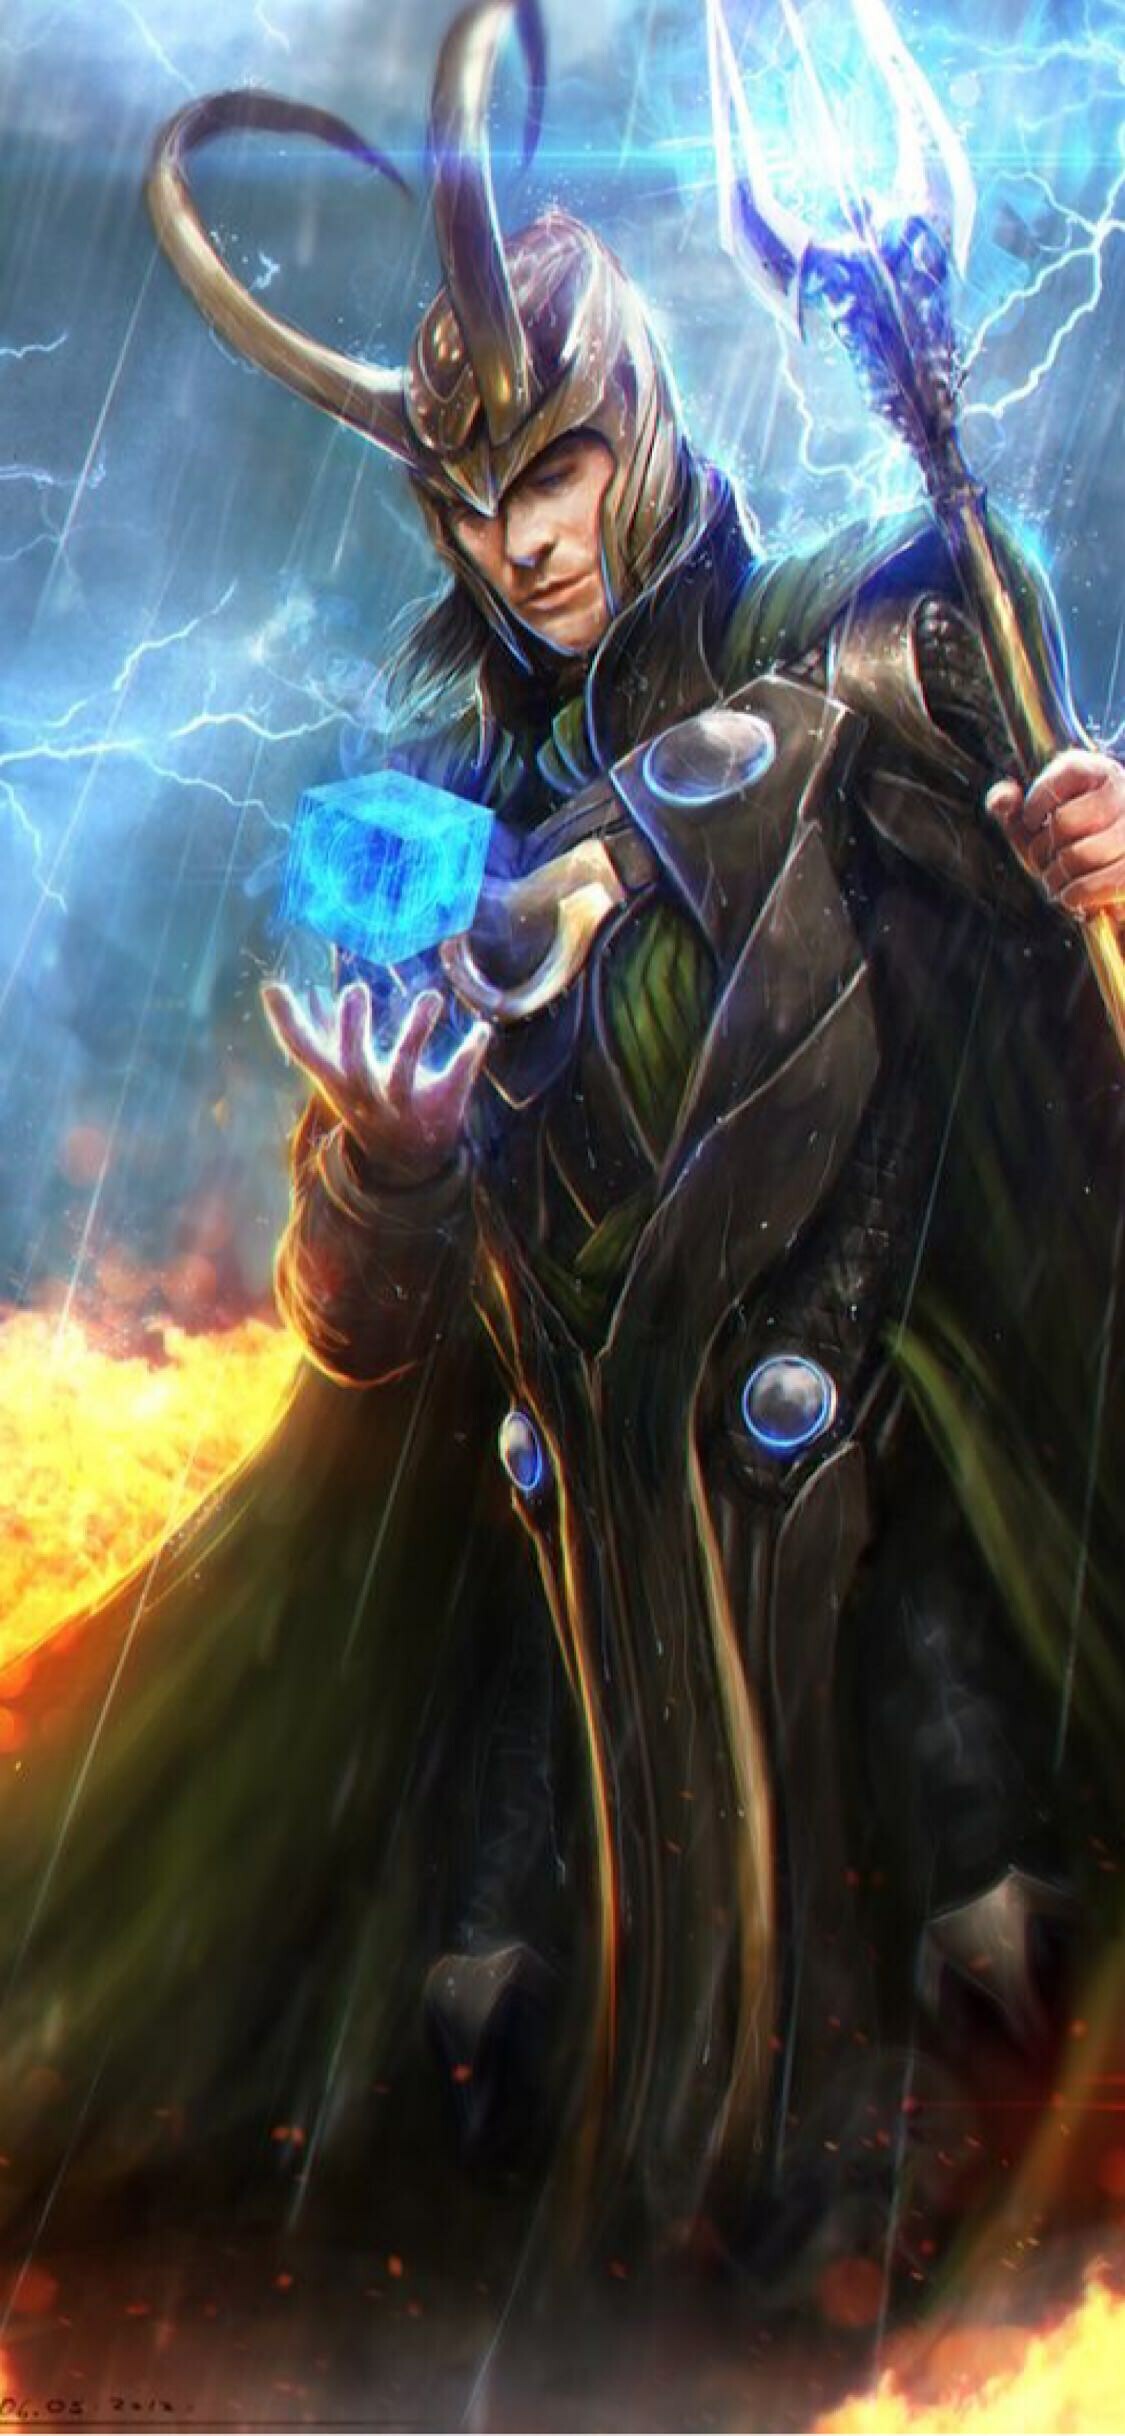 Loki: Marvel, Raised by Odin and Frigga as an Asgardian prince, along with Thor. 1130x2440 HD Background.